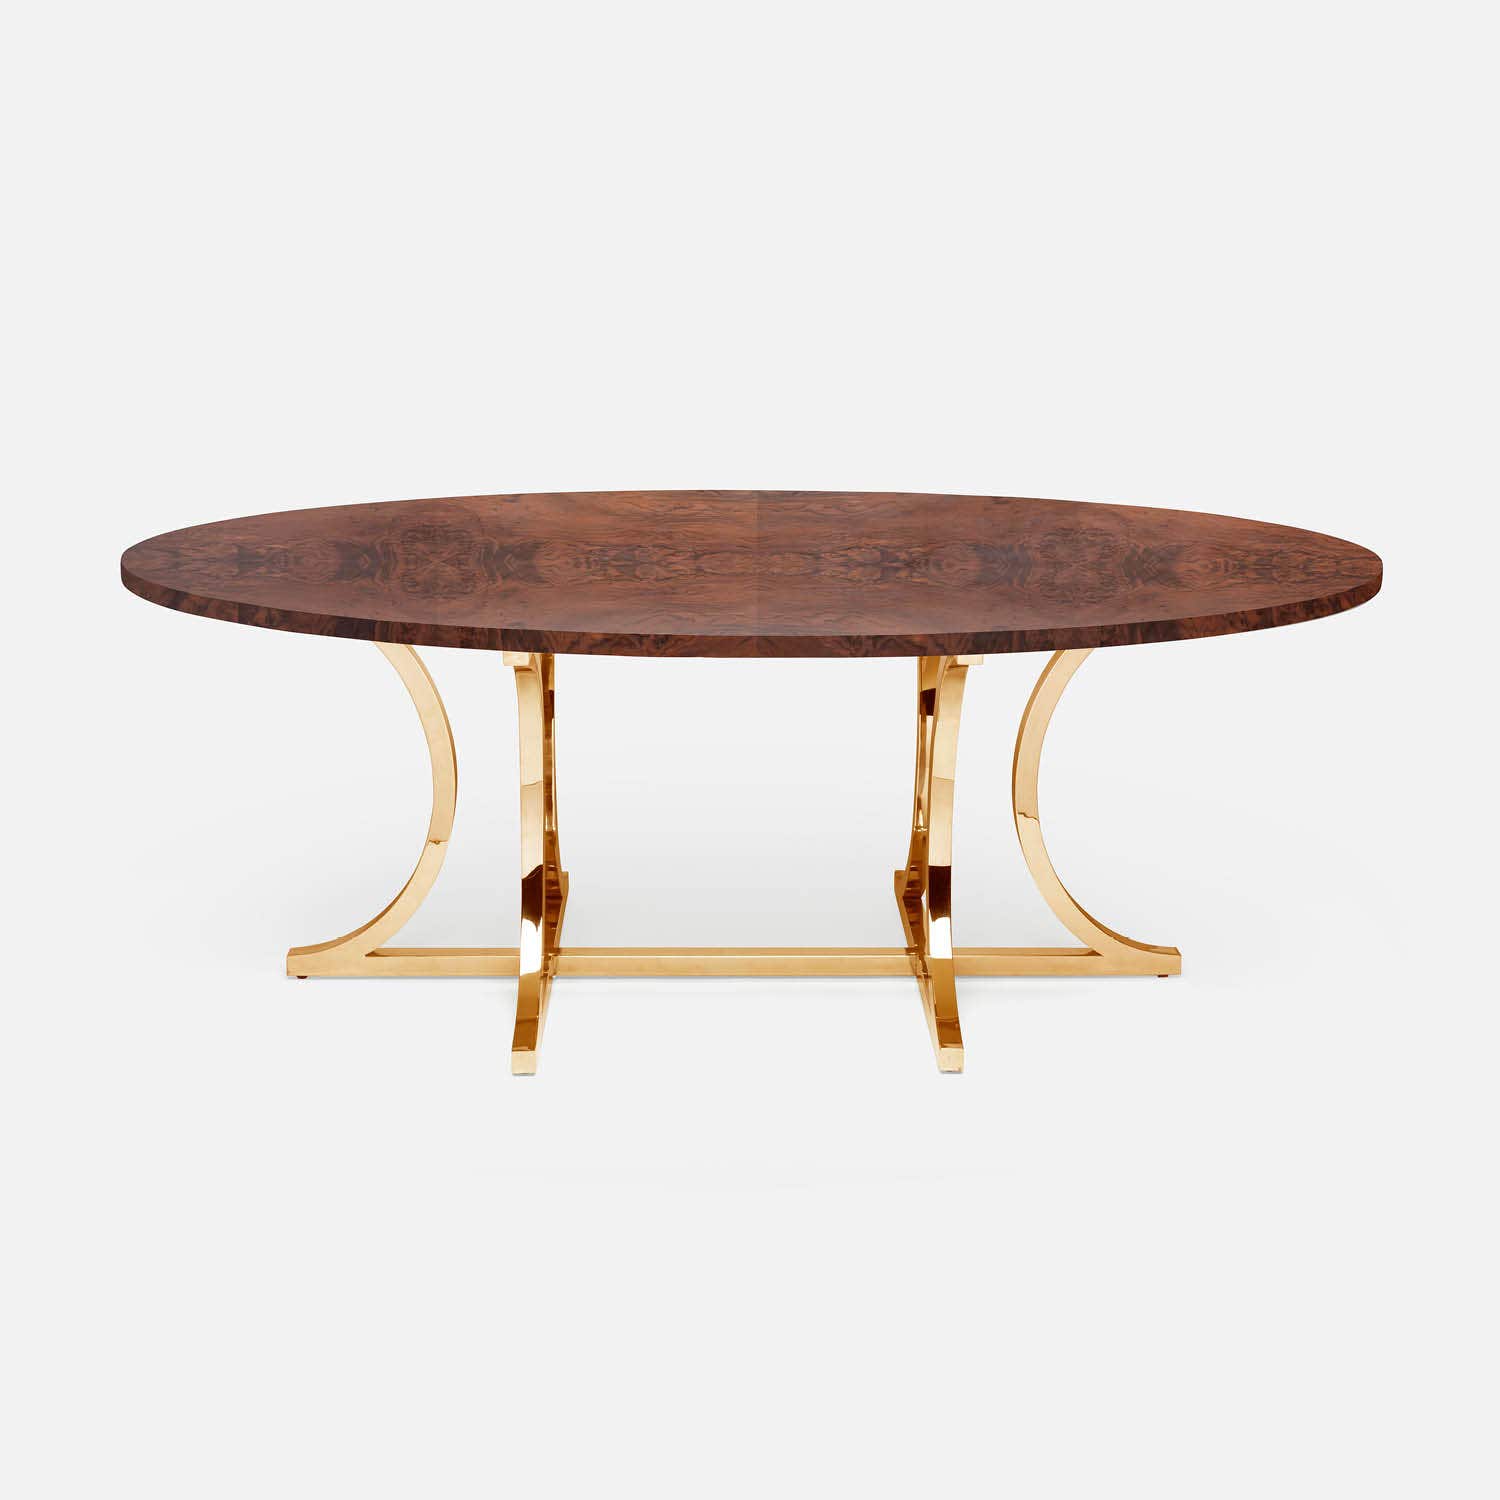 Made Goods Leighton 96" x 44" x 30" Polished Gold Steel Dinning Table With Oval Walnut Veneer Table Top